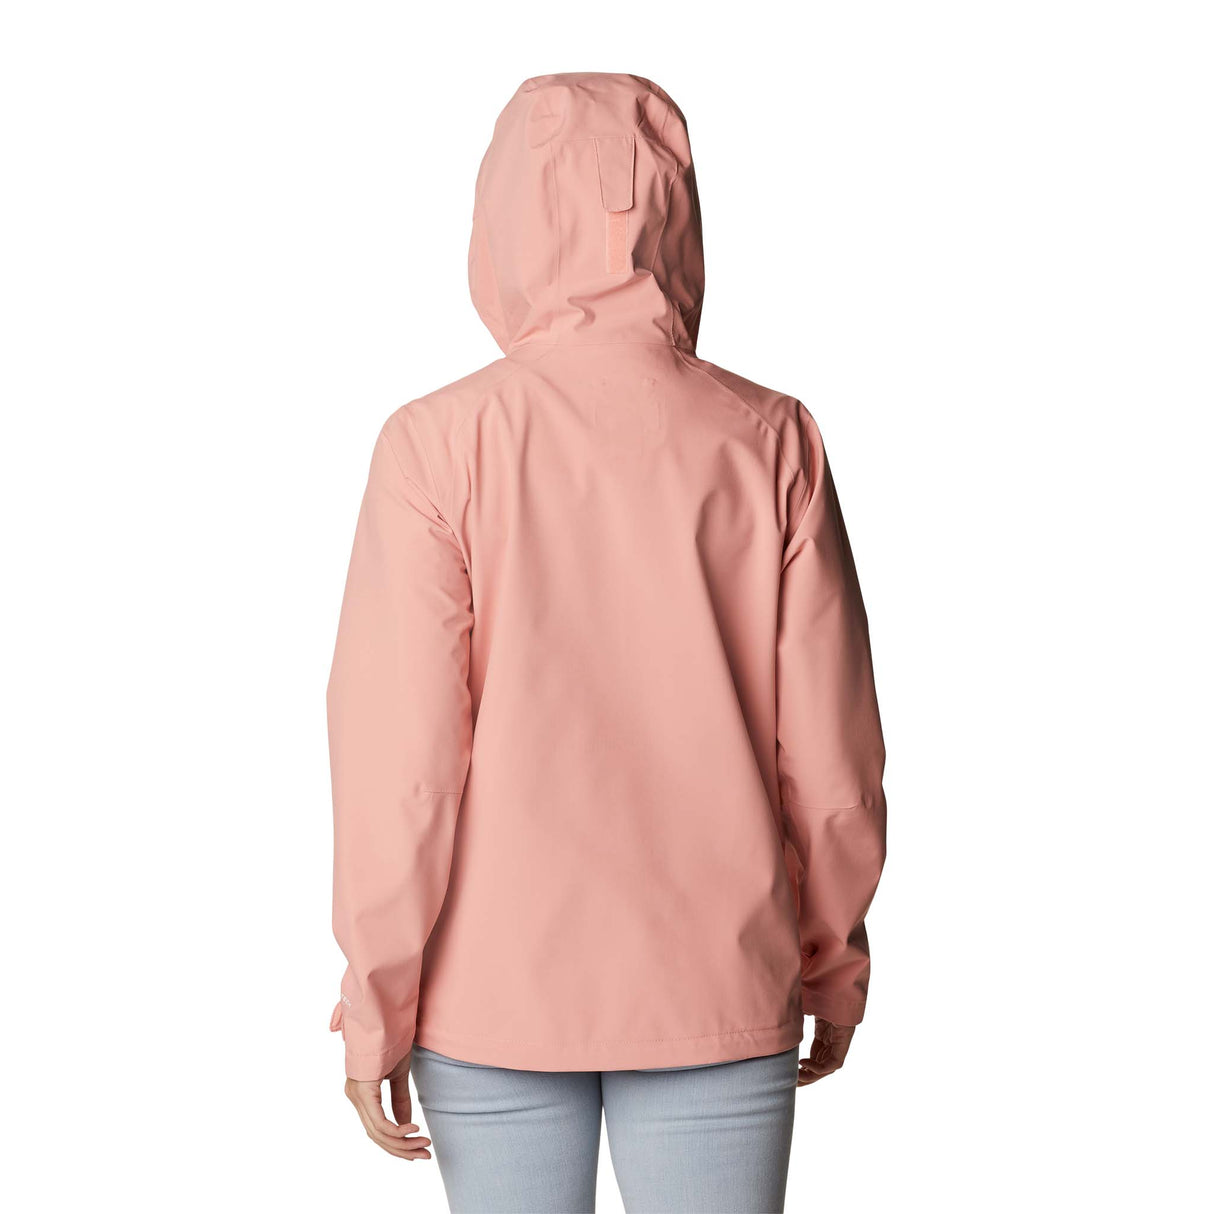 Columbia Earth Explorer Shell manteau coquille coral reef femme dos